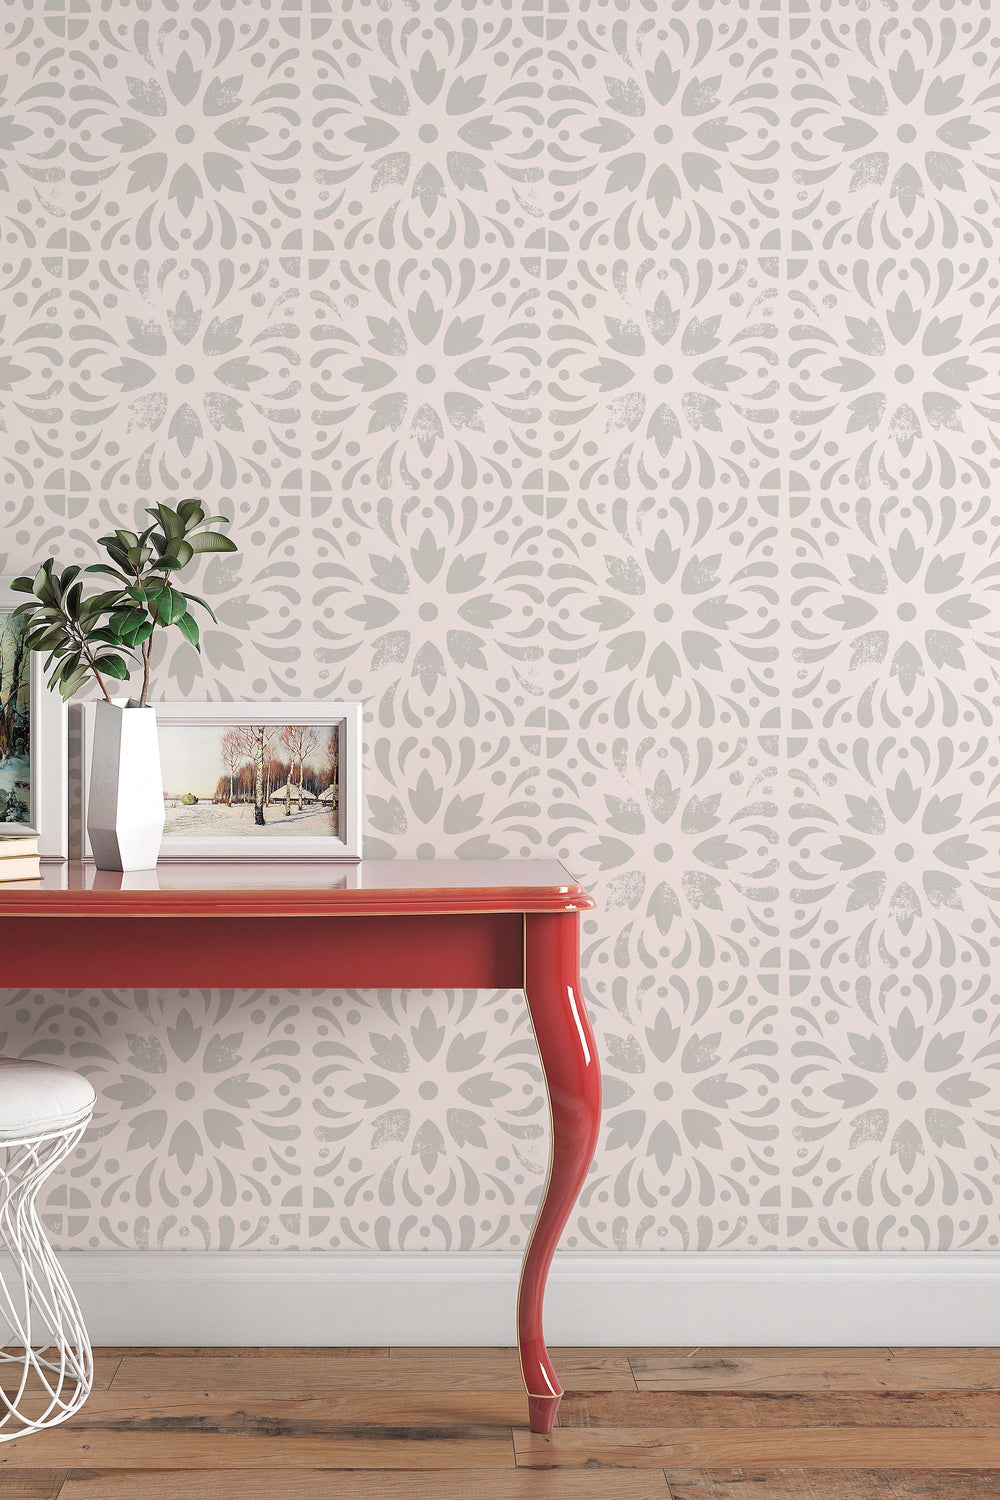 Boho Design gray floral stamps on beige Wallcovering Canvas Peel & Stick  - Removable Self Adhesive wallpaper #3180